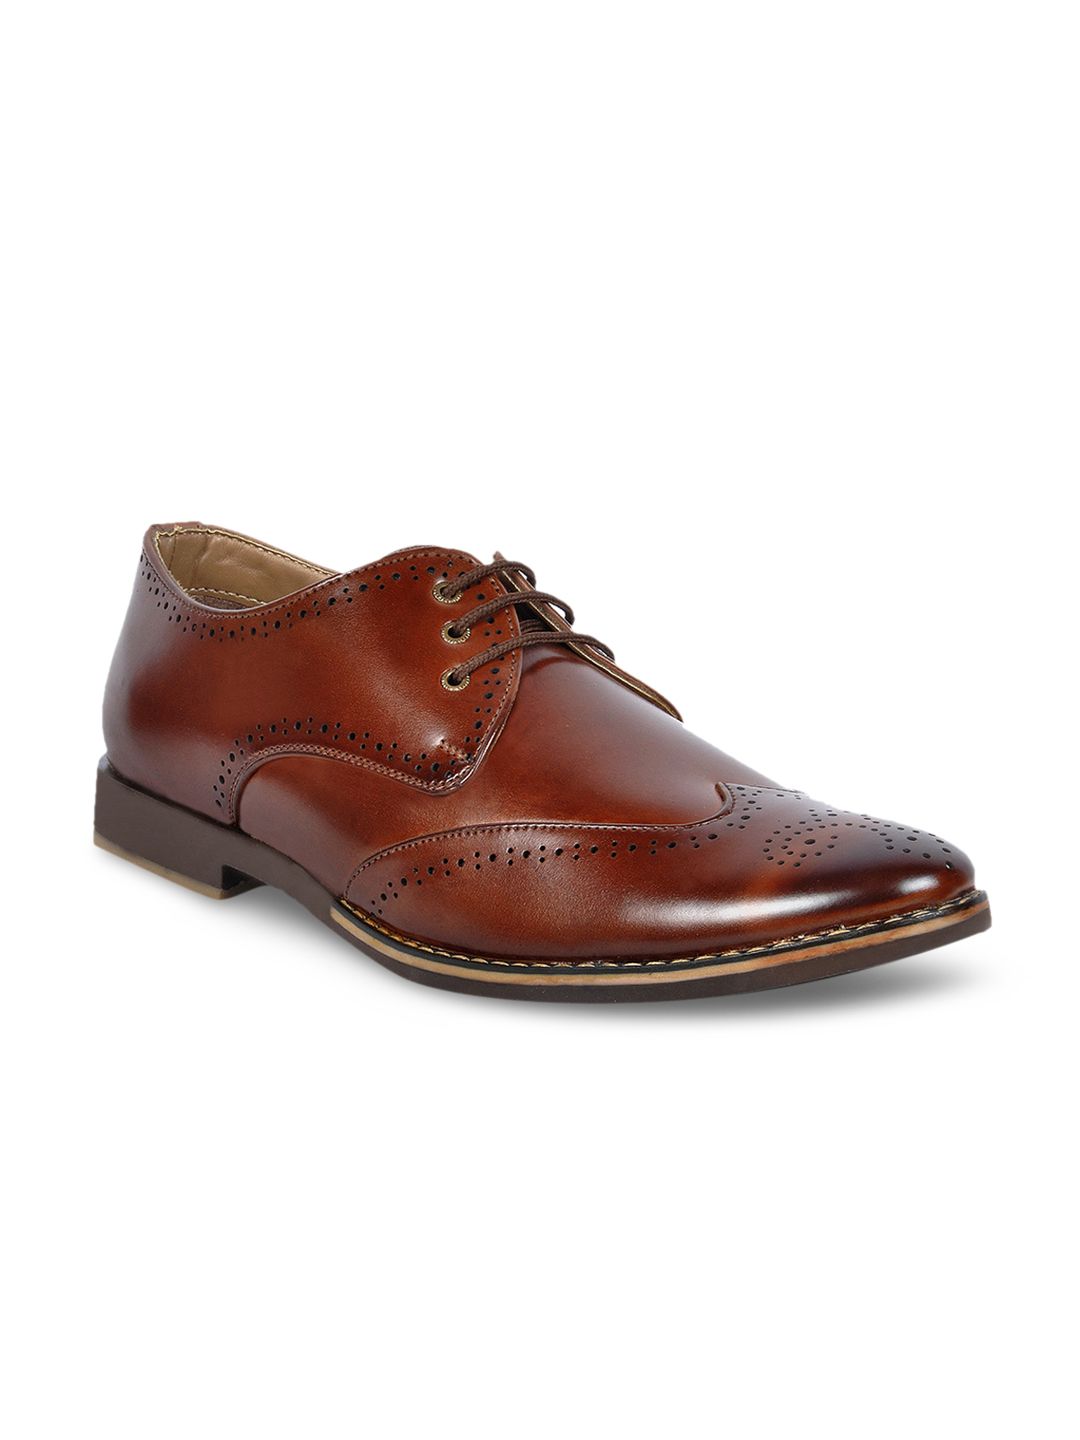 30 Best Formal Shoes for Men and Women In Branded Styles